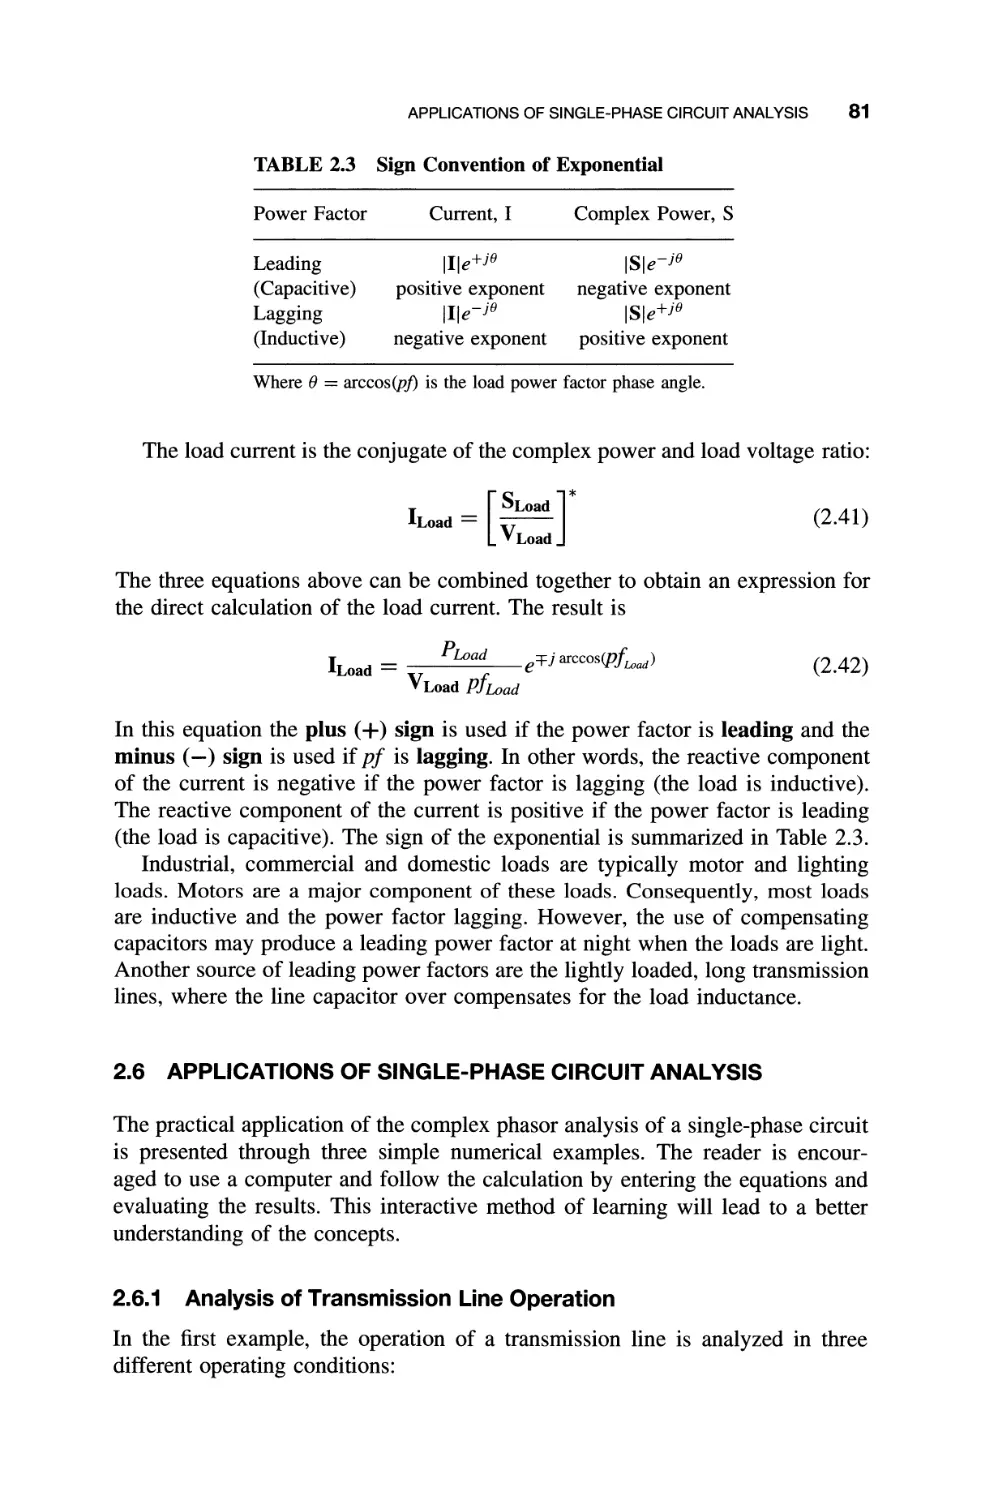 2.6 Applications of Single-phase Circuit Analysis